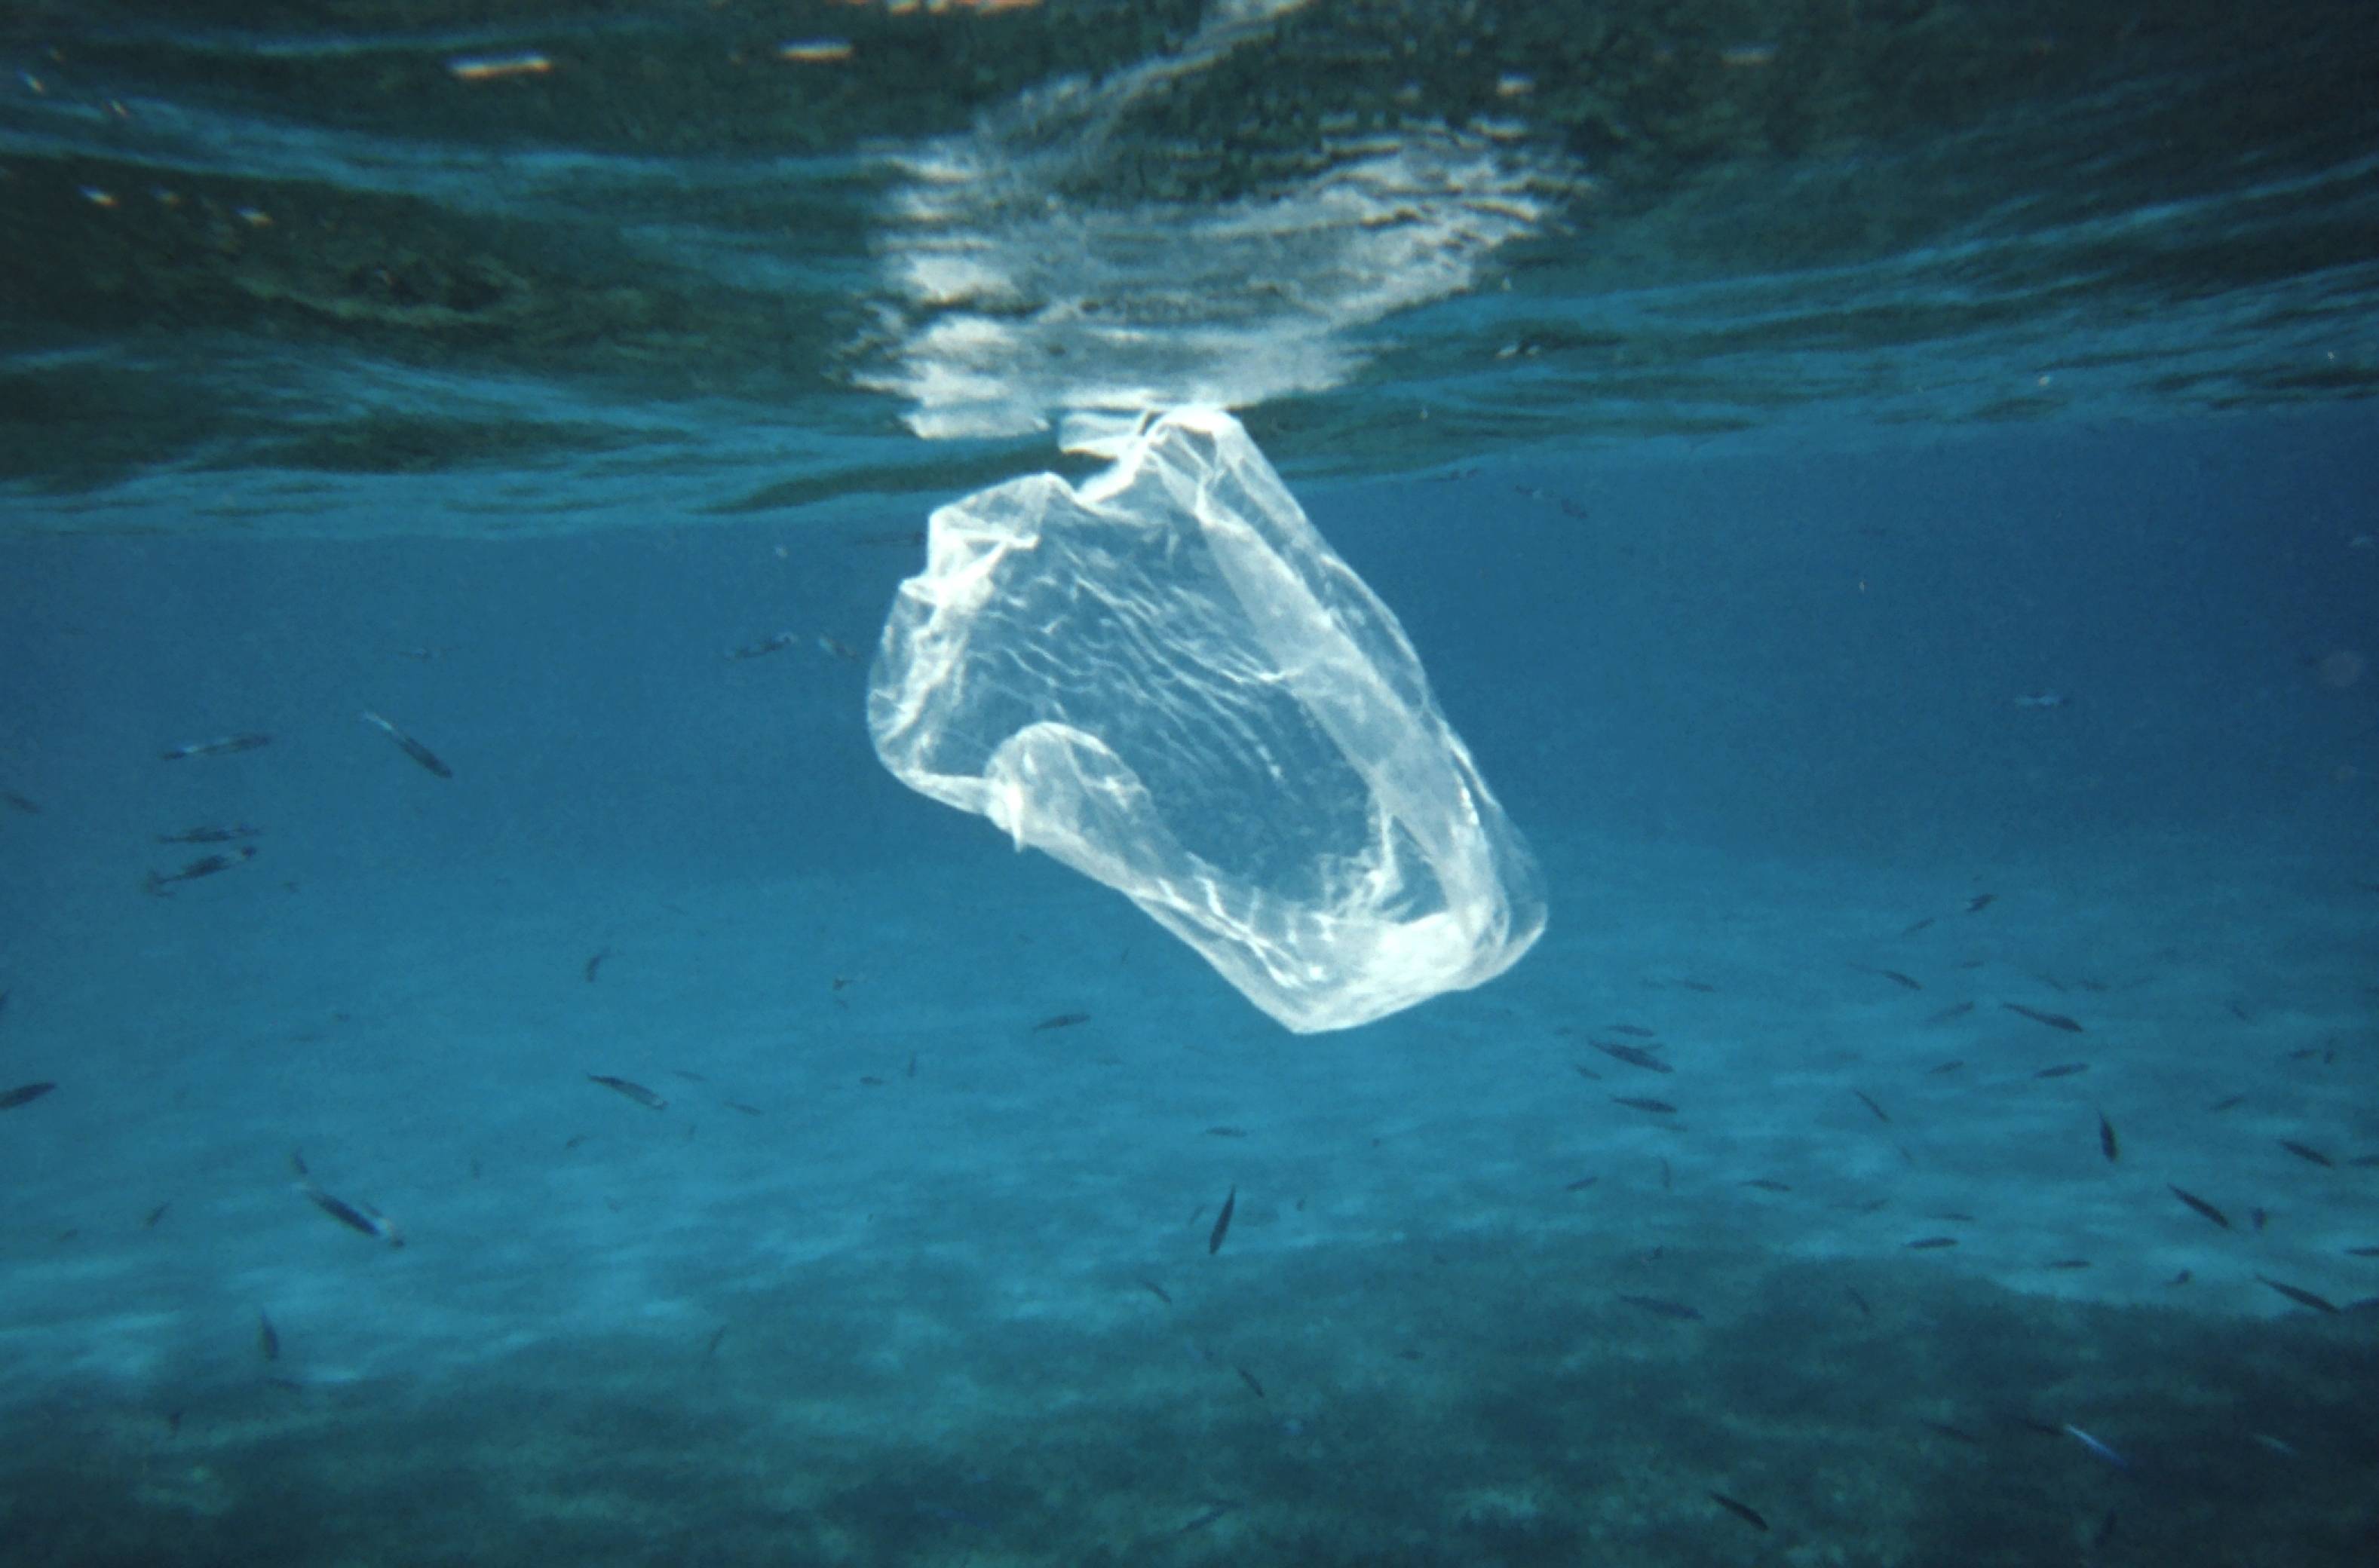 Plastic in Rivers Major Source of Ocean Pollution: Study